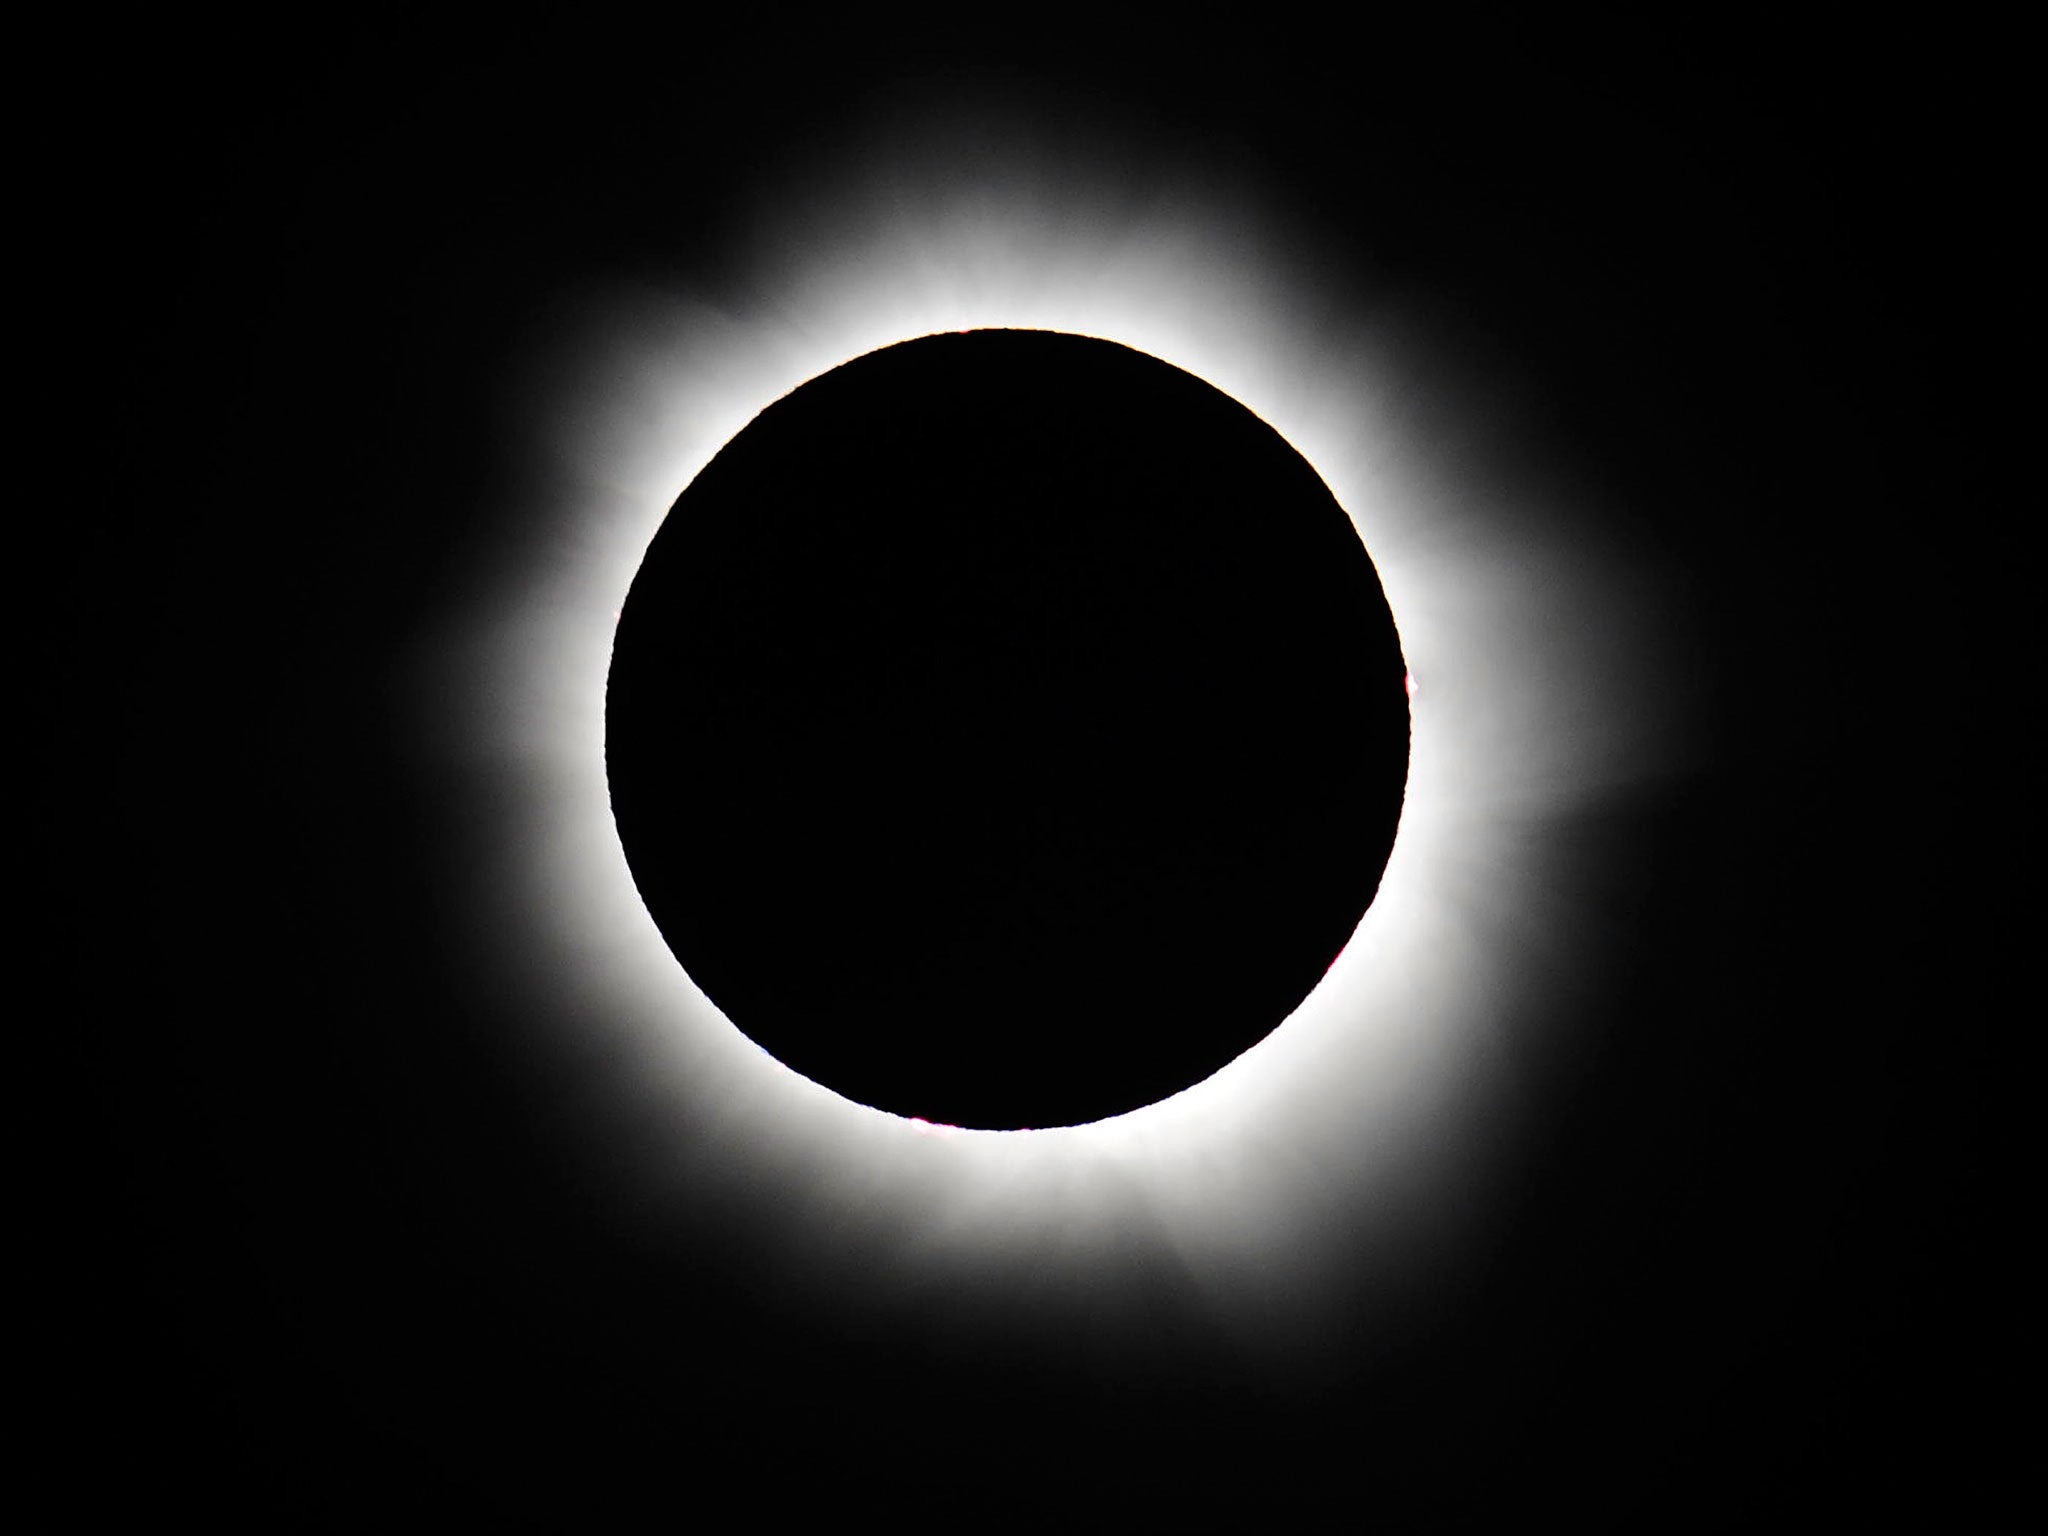 Around the UK the proportion of the Sun covered by the Moon during the near-total solar eclipse will increase towards the North, ranging from 84 per cent in London to 89 per cent in Manchester, 93 per cent in Edinburgh, and 97 per cent in Lerwick in the S